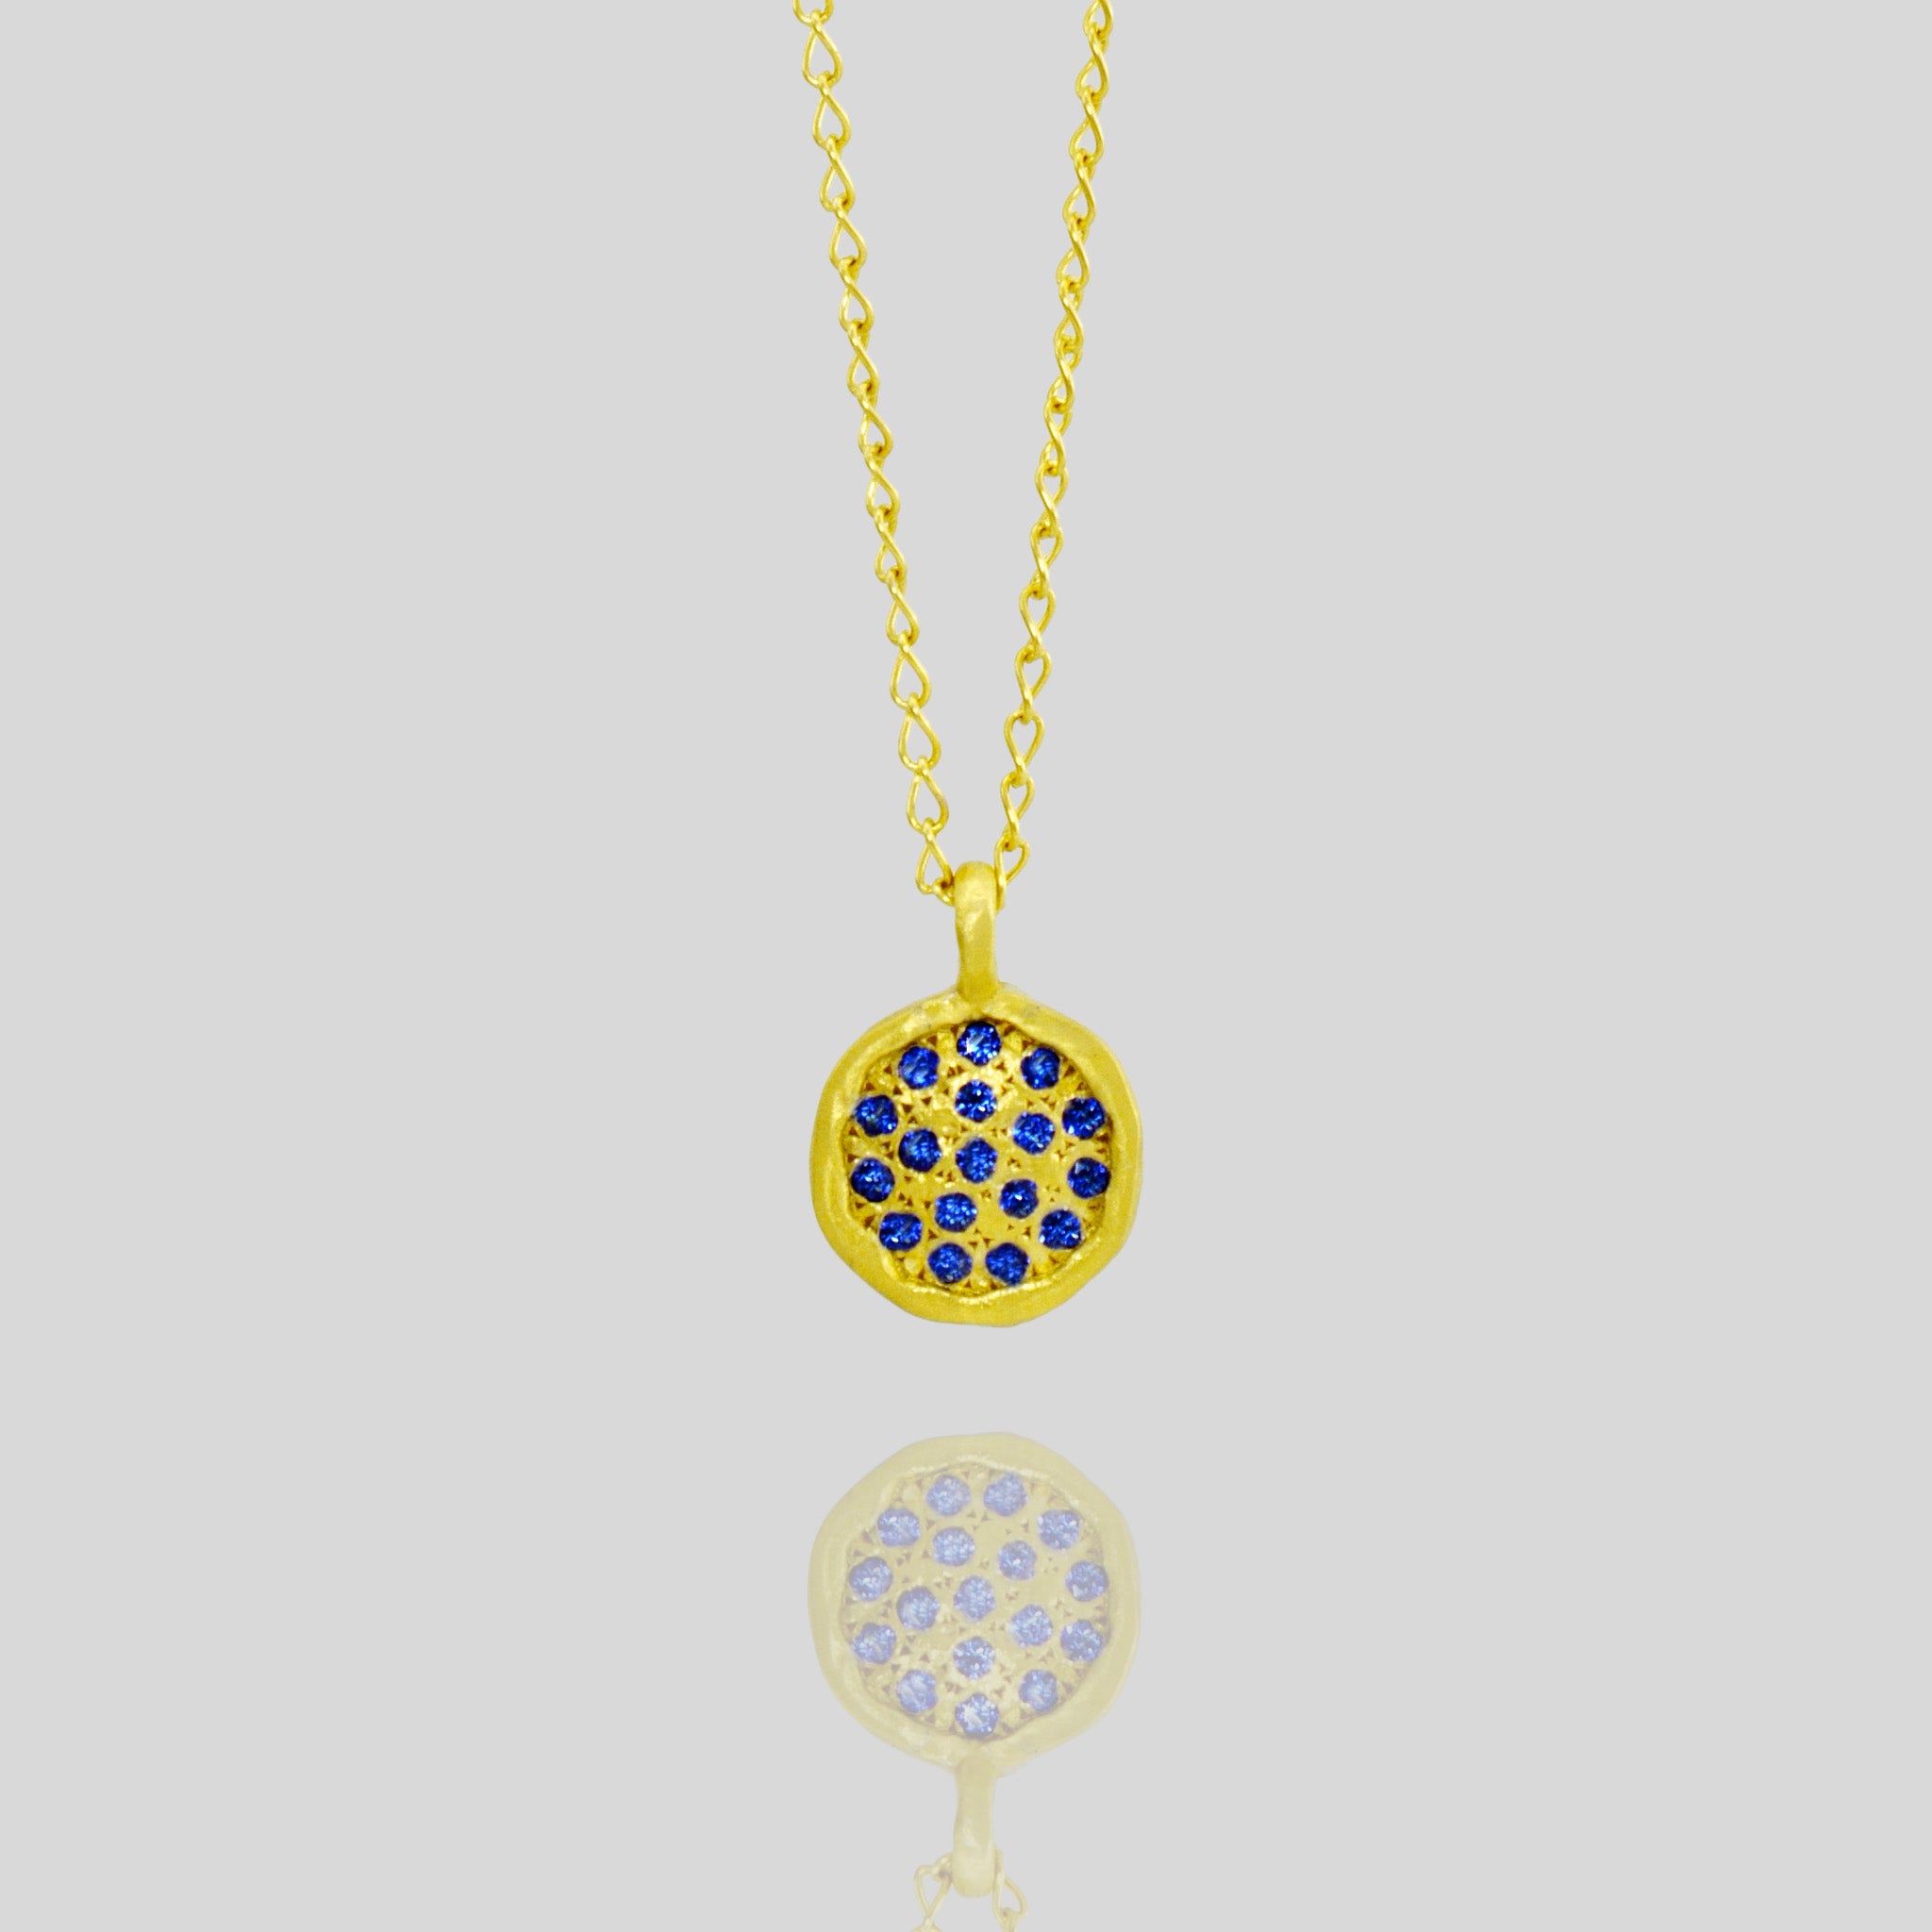 Close up of Starlit gold pendant, exquisitely handmade from Yellow Gold, featuring a small gold plate adorned with scattered Sapphires, evoking visions of a vibrant starry night.